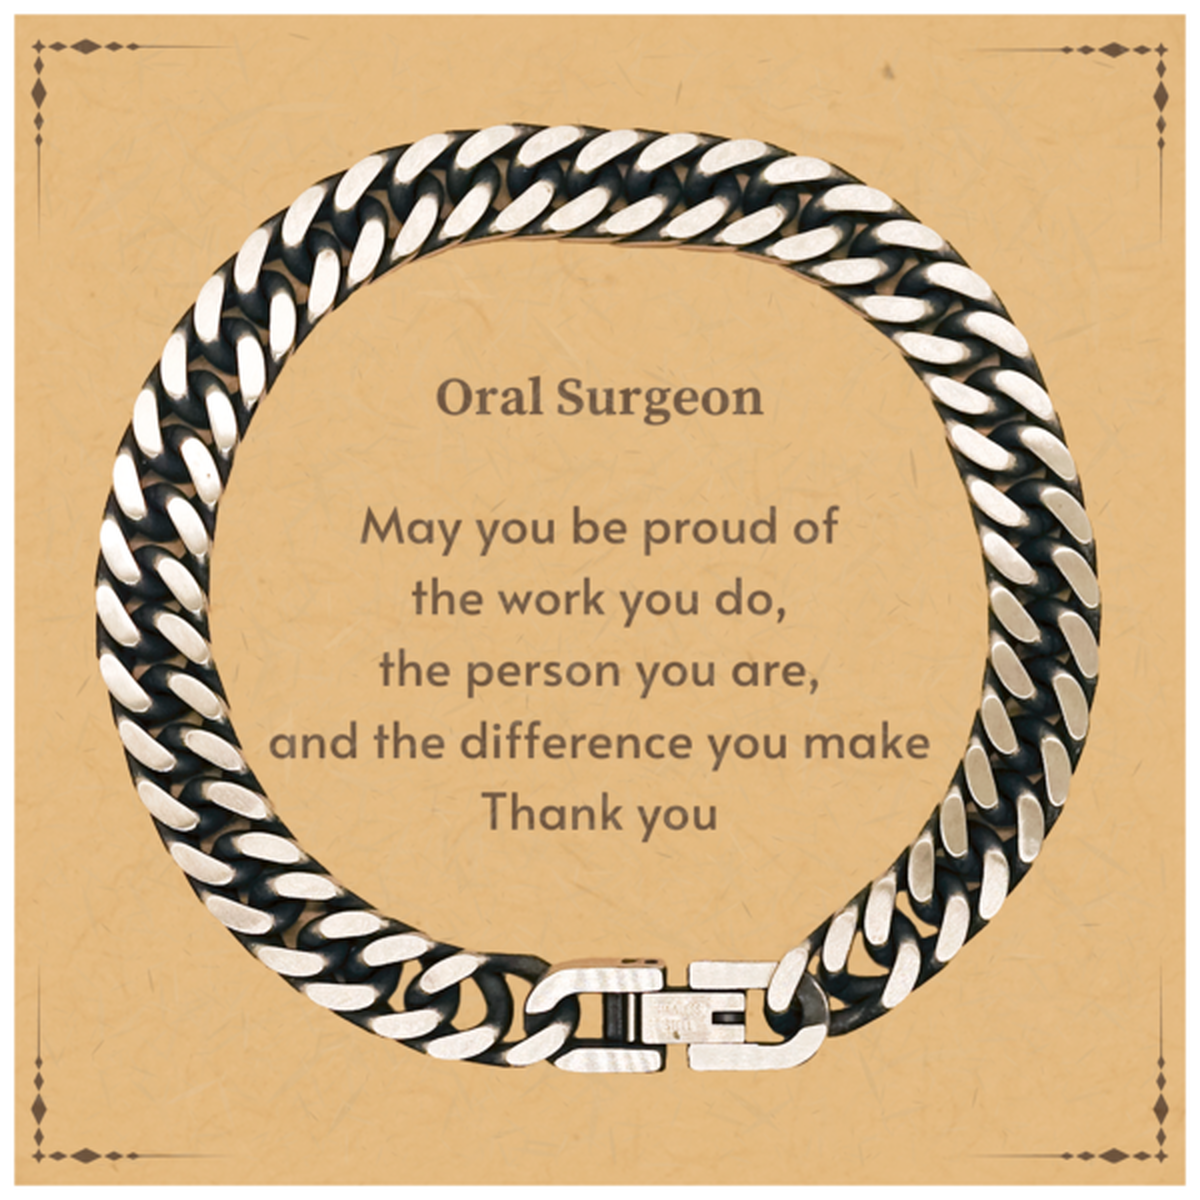 Heartwarming Cuban Link Chain Bracelet Retirement Coworkers Gifts for Oral Surgeon, Oral Surgeon May You be proud of the work you do, the person you are Gifts for Boss Men Women Friends